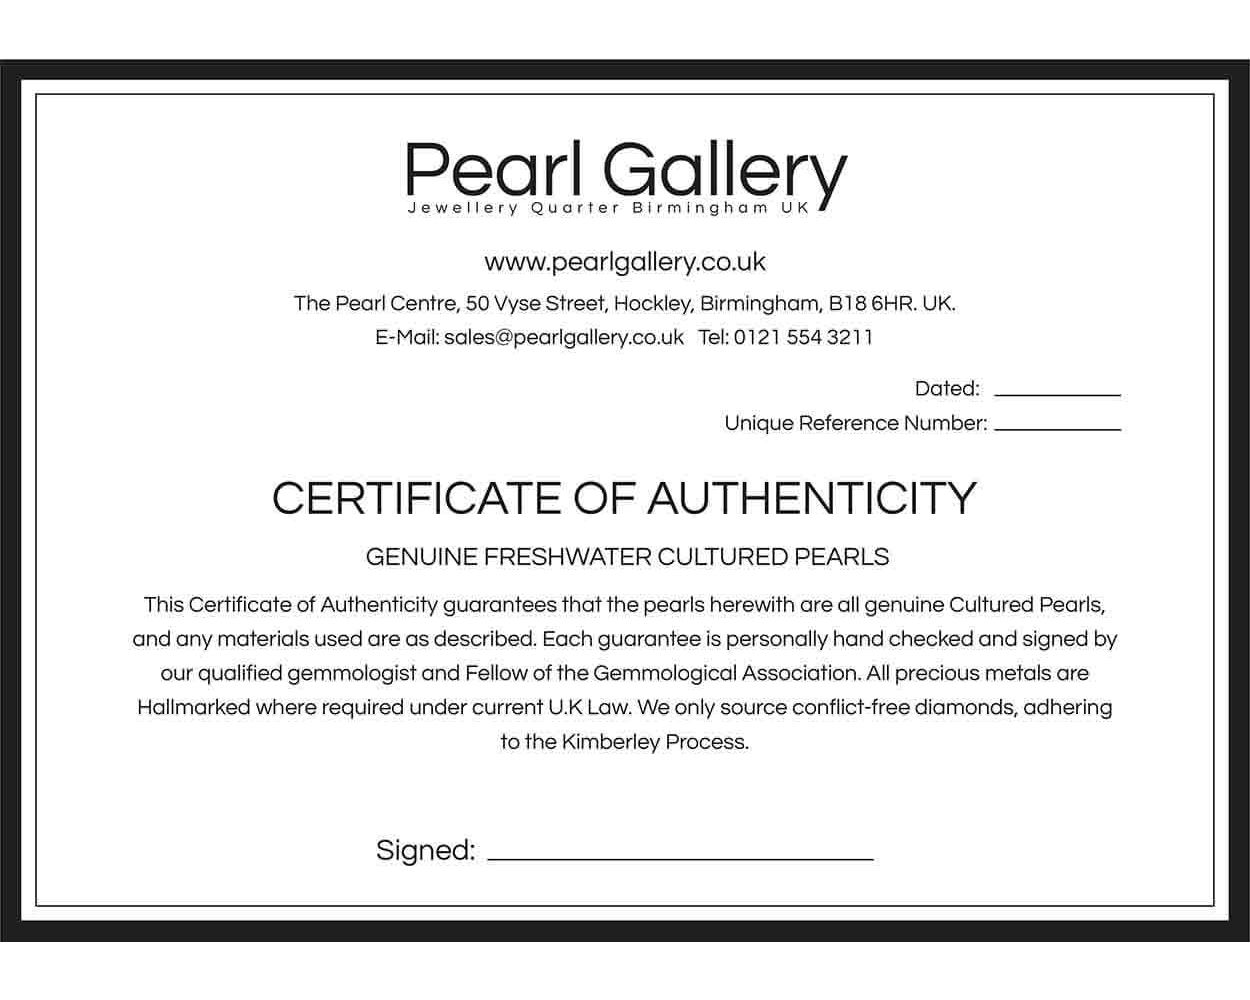 Freshwater Certificate of Authenticity